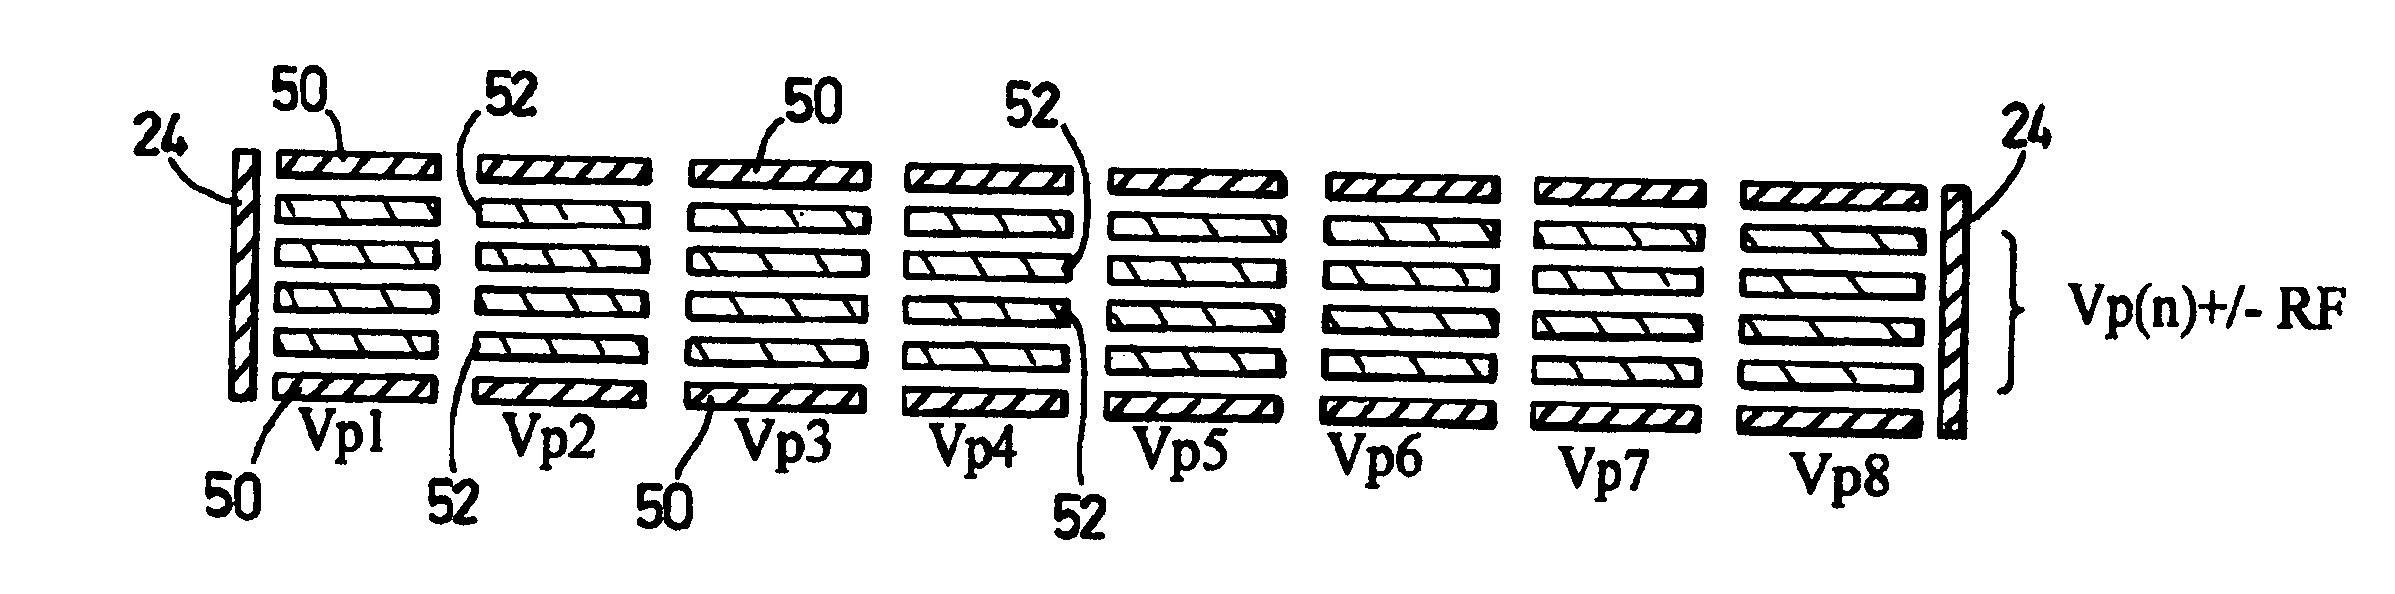 Ion extraction devices, mass spectrometer devices, and methods of selectively extracting ions and performing mass spectrometry